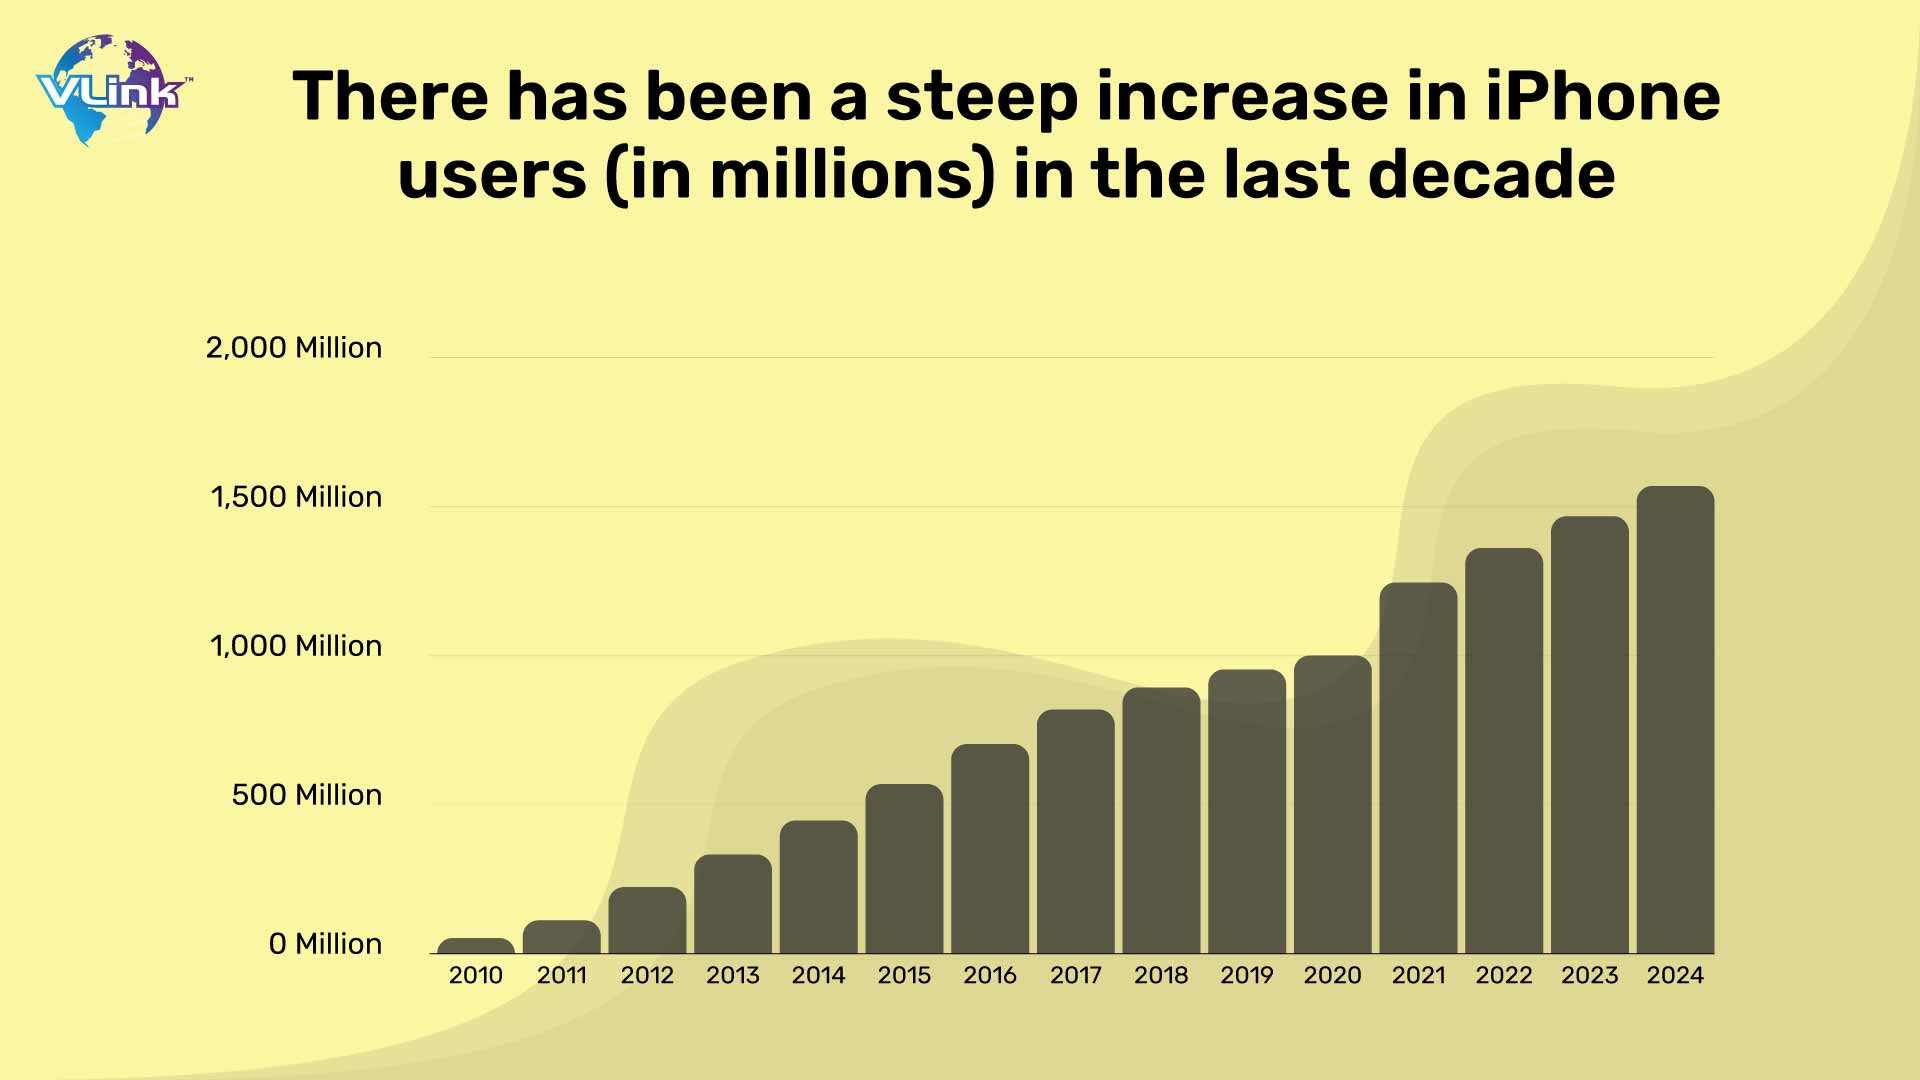 There has been a steep increase in iPhone users (in millions) in the last decade